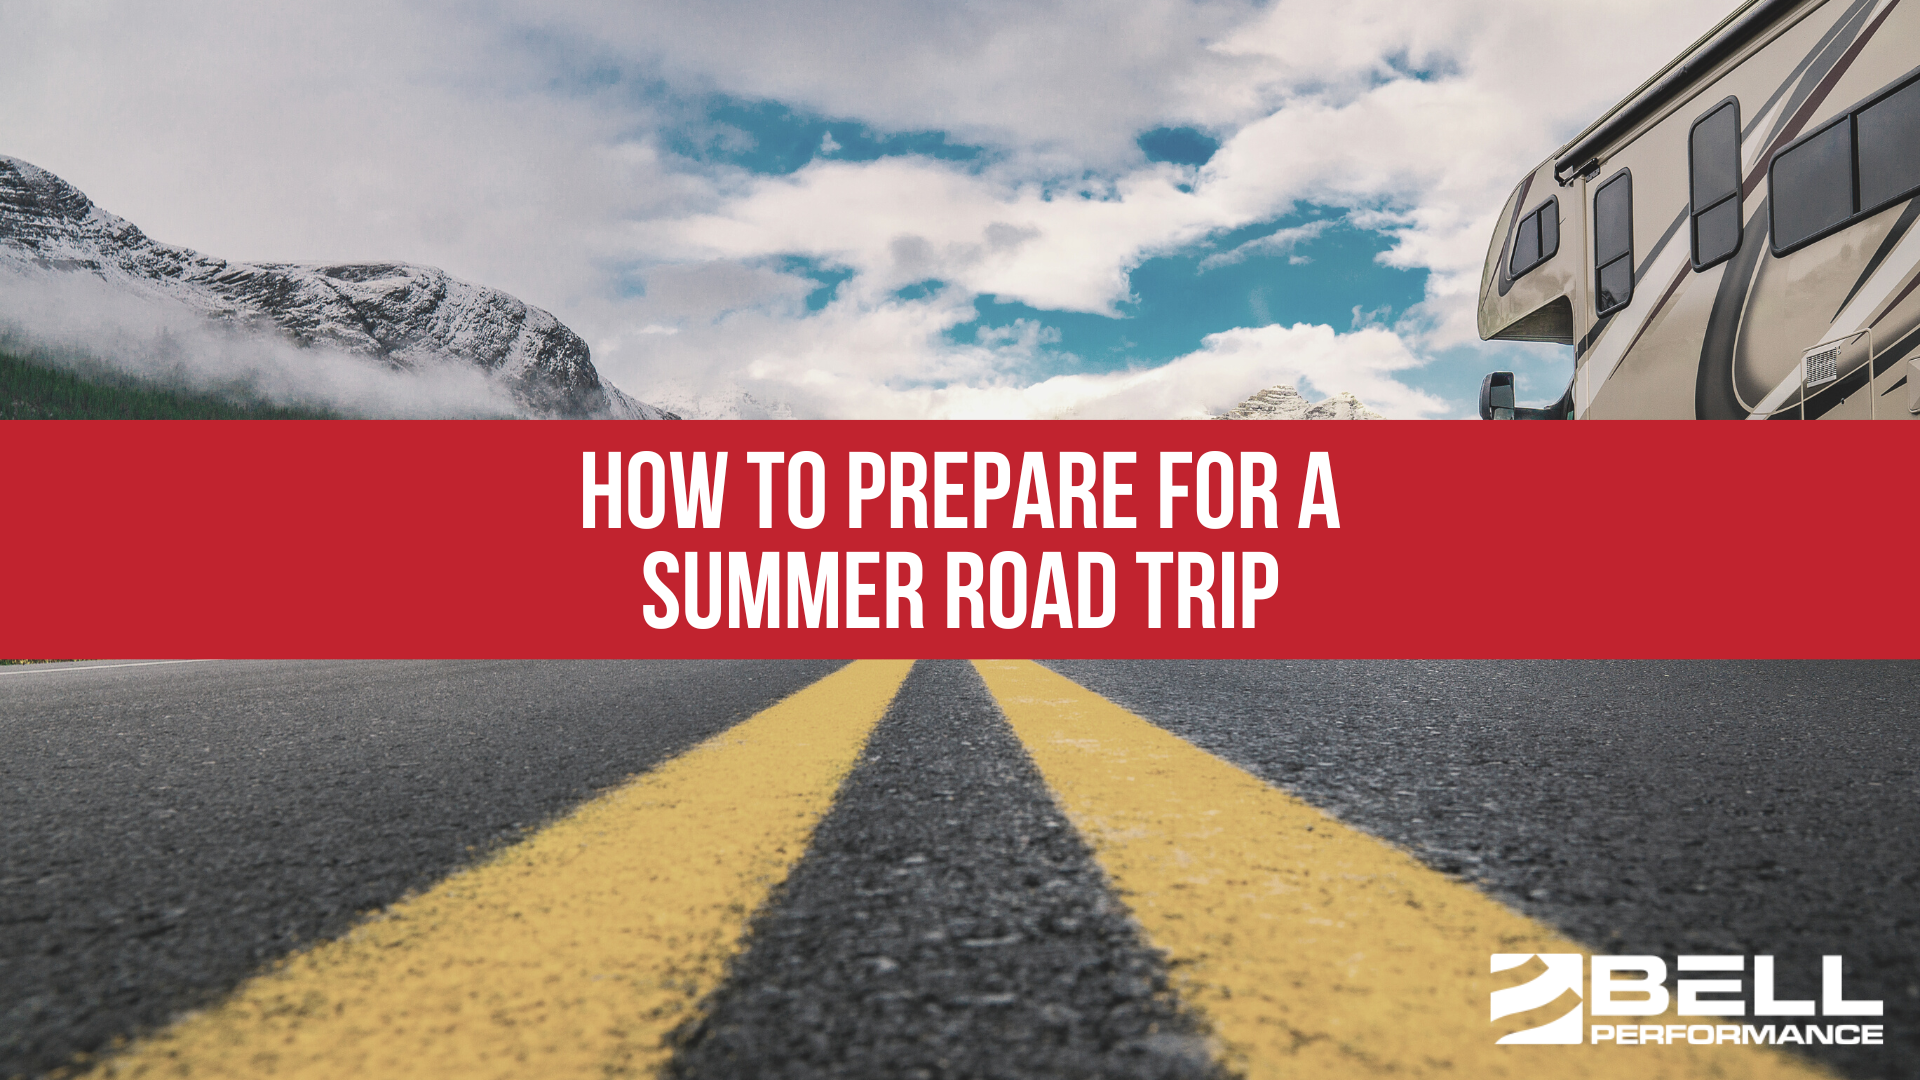 How to Prepare for a Summer Road Trip